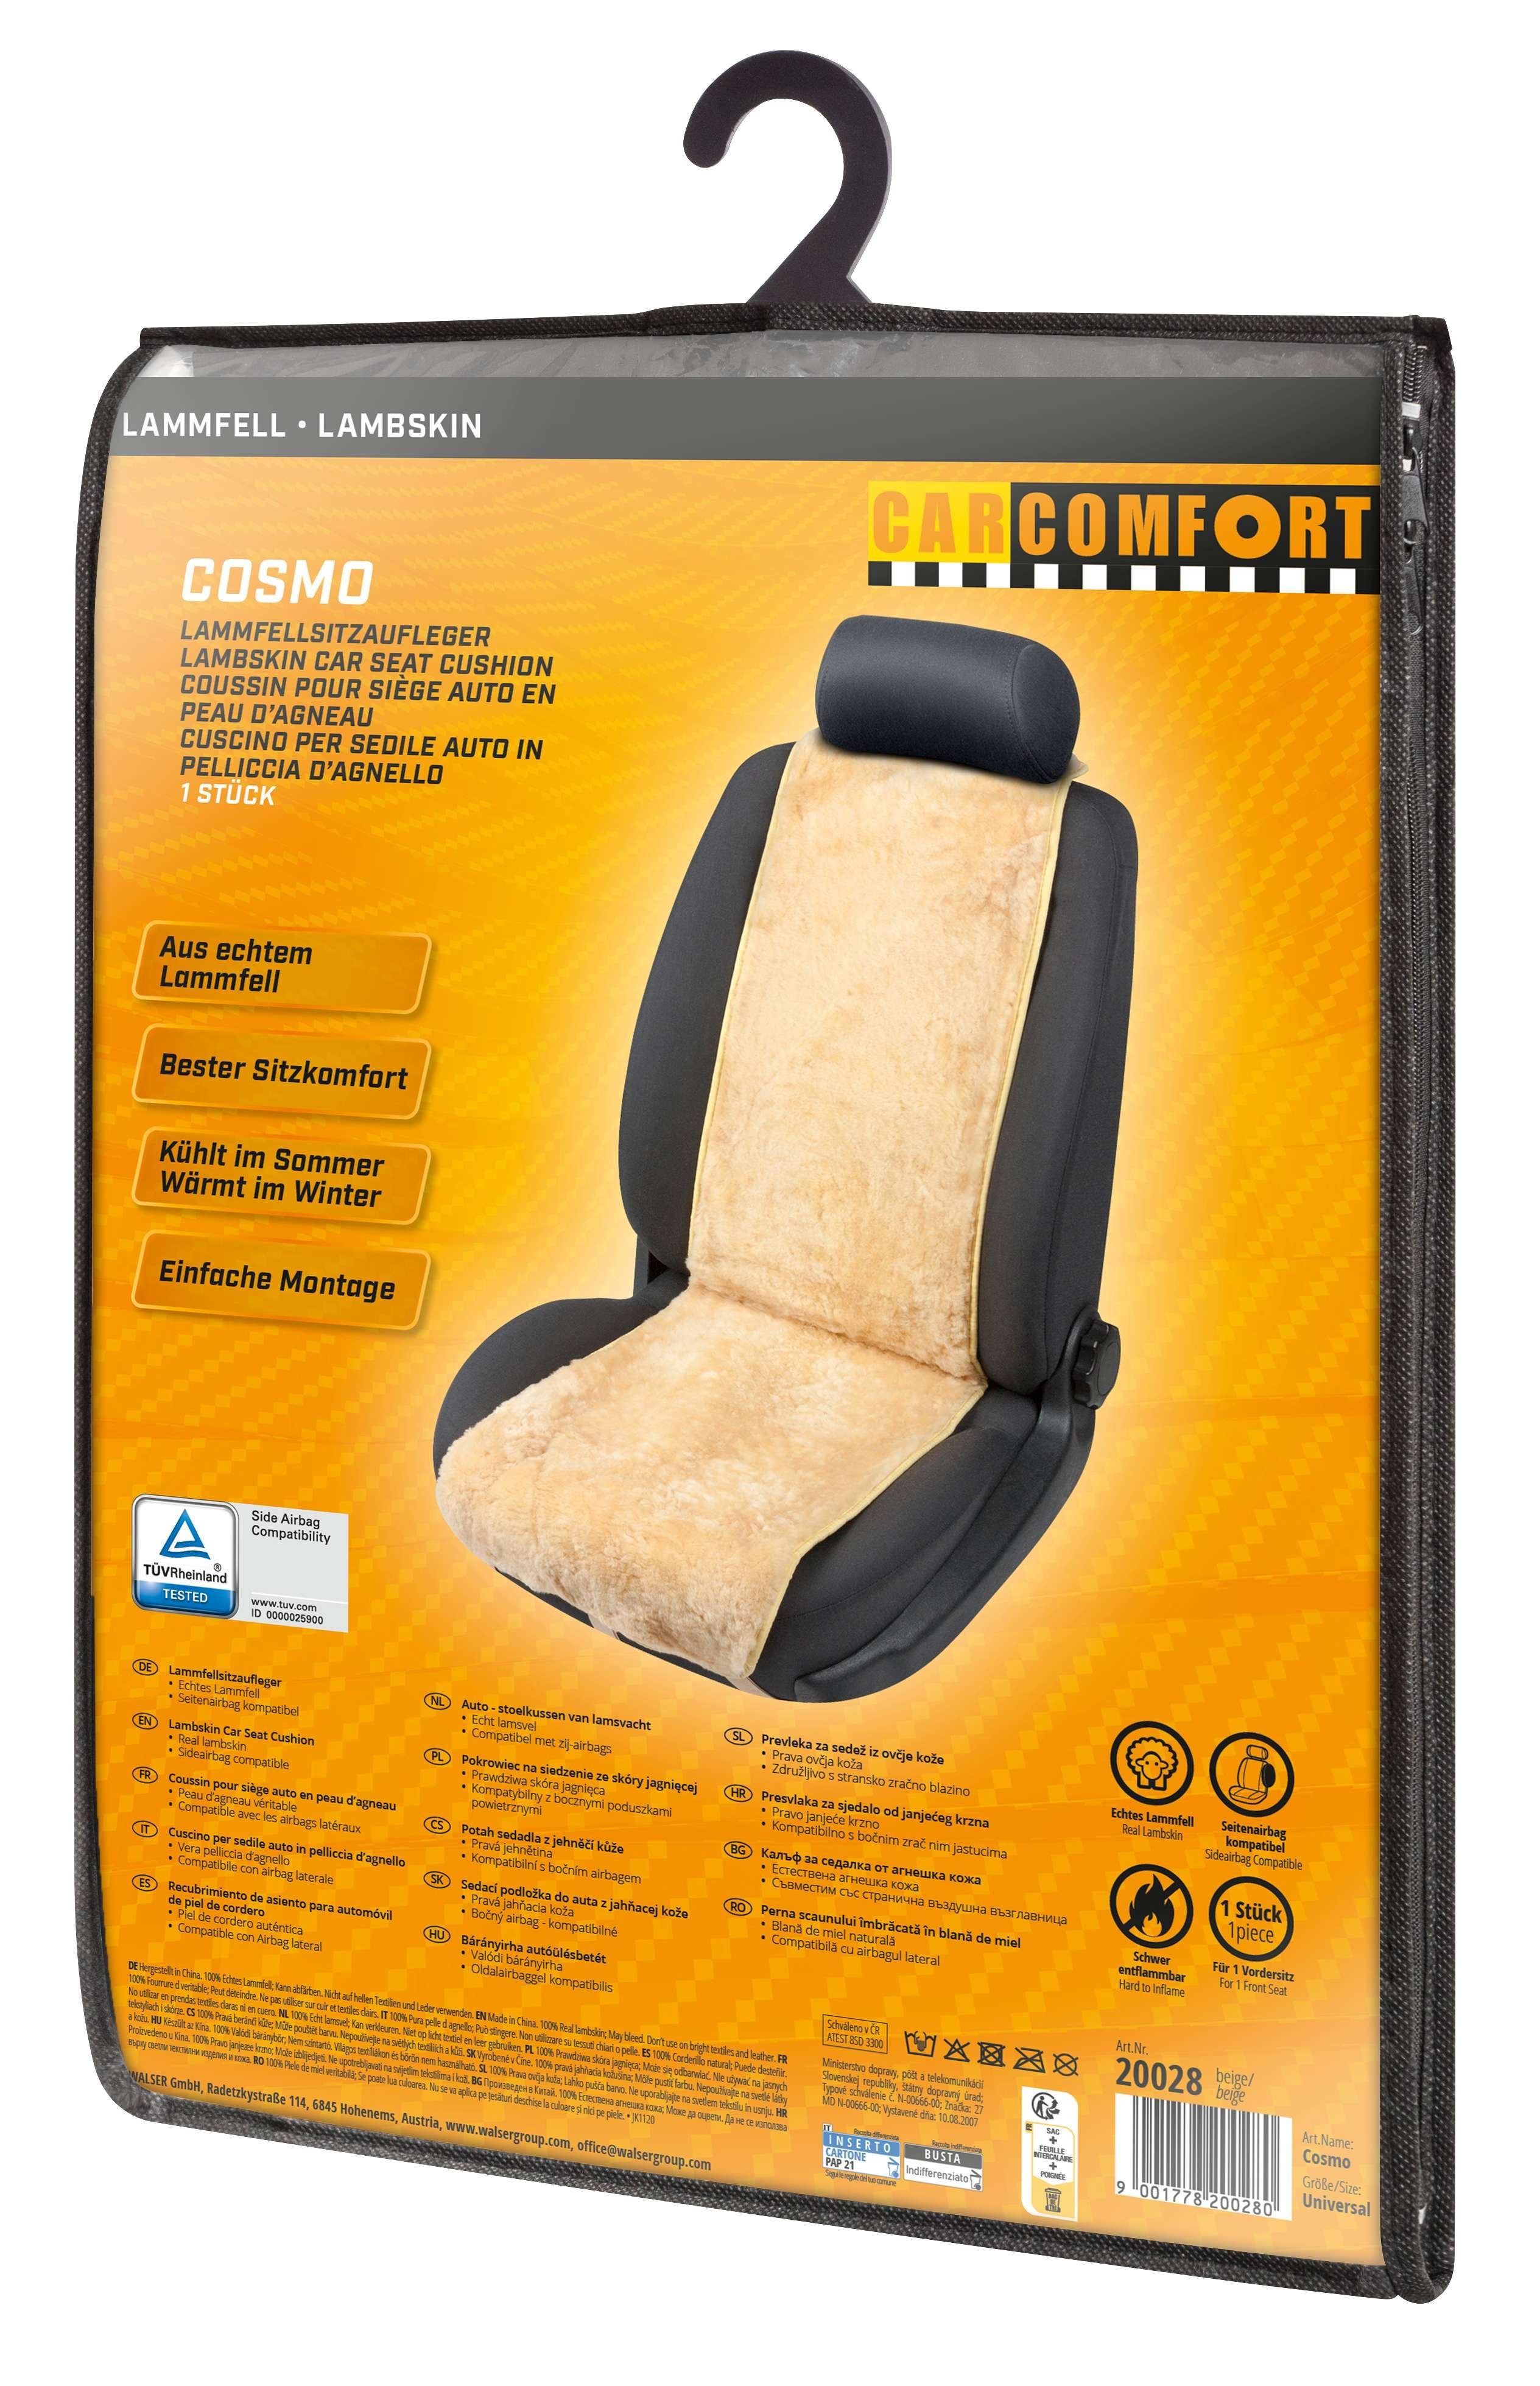 Car Seat cover in lambskin Cosmo beige 12-14mm fur height